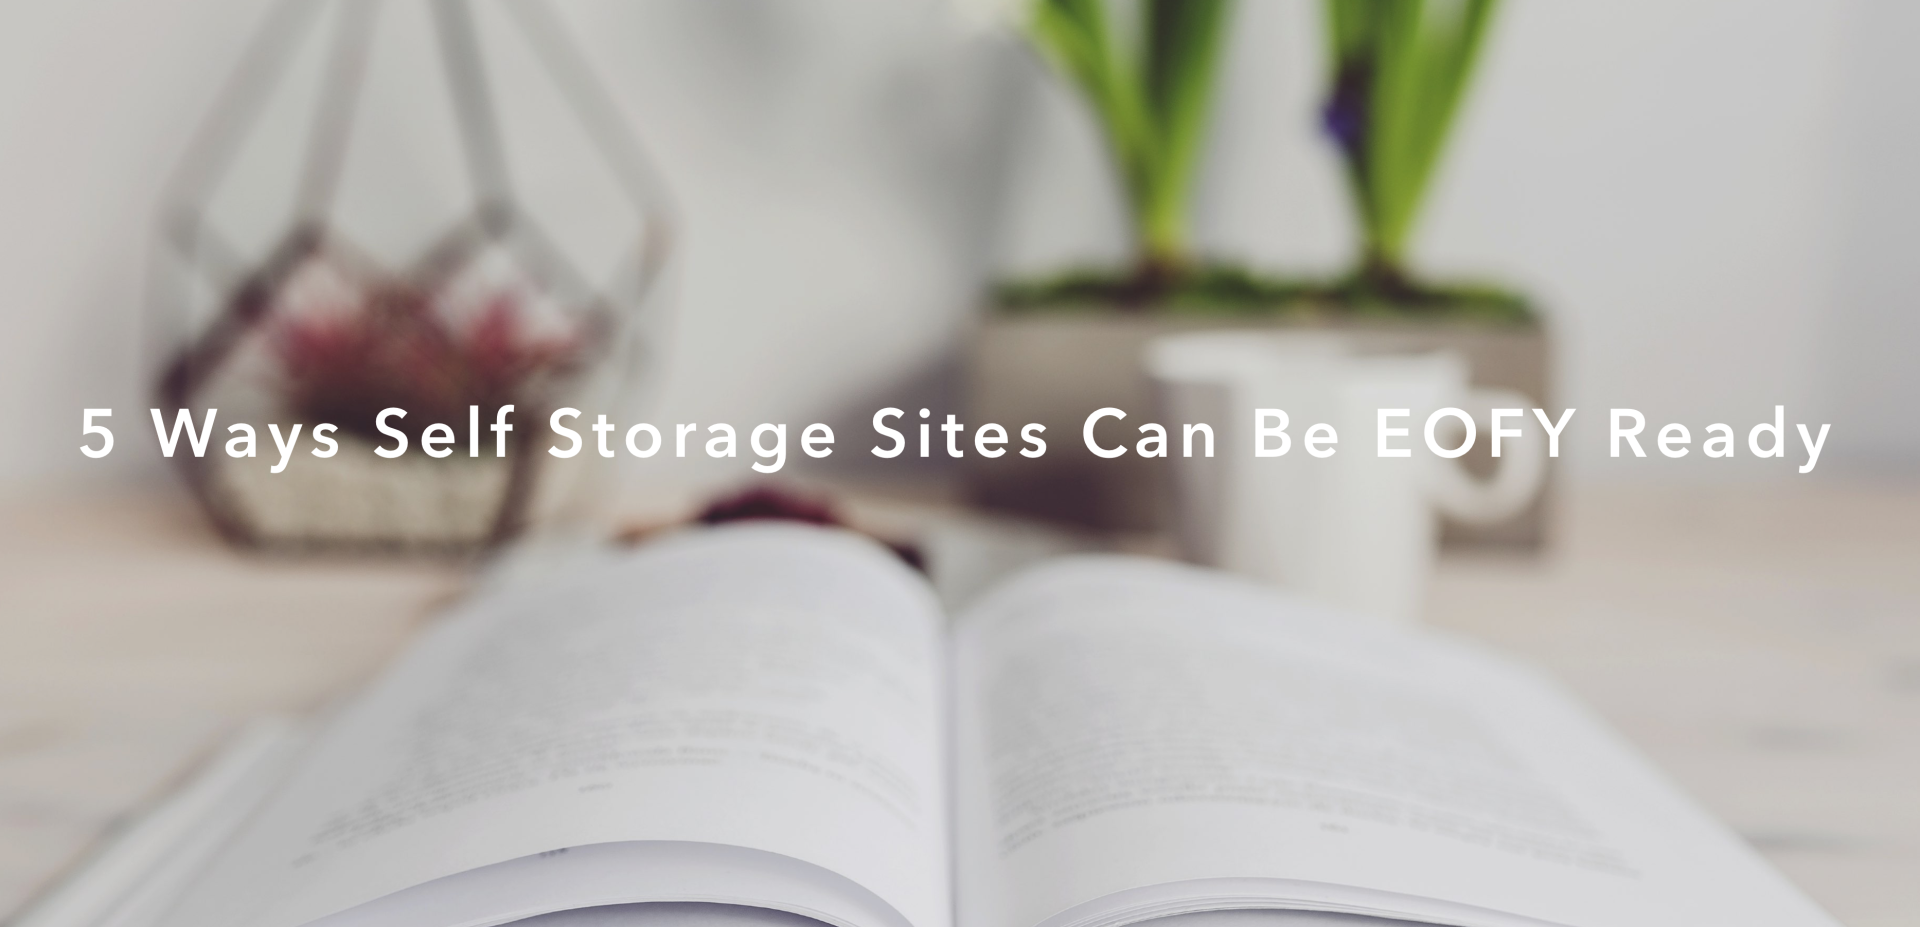 5 Ways Self Storage Sites Can Be EOFY Ready